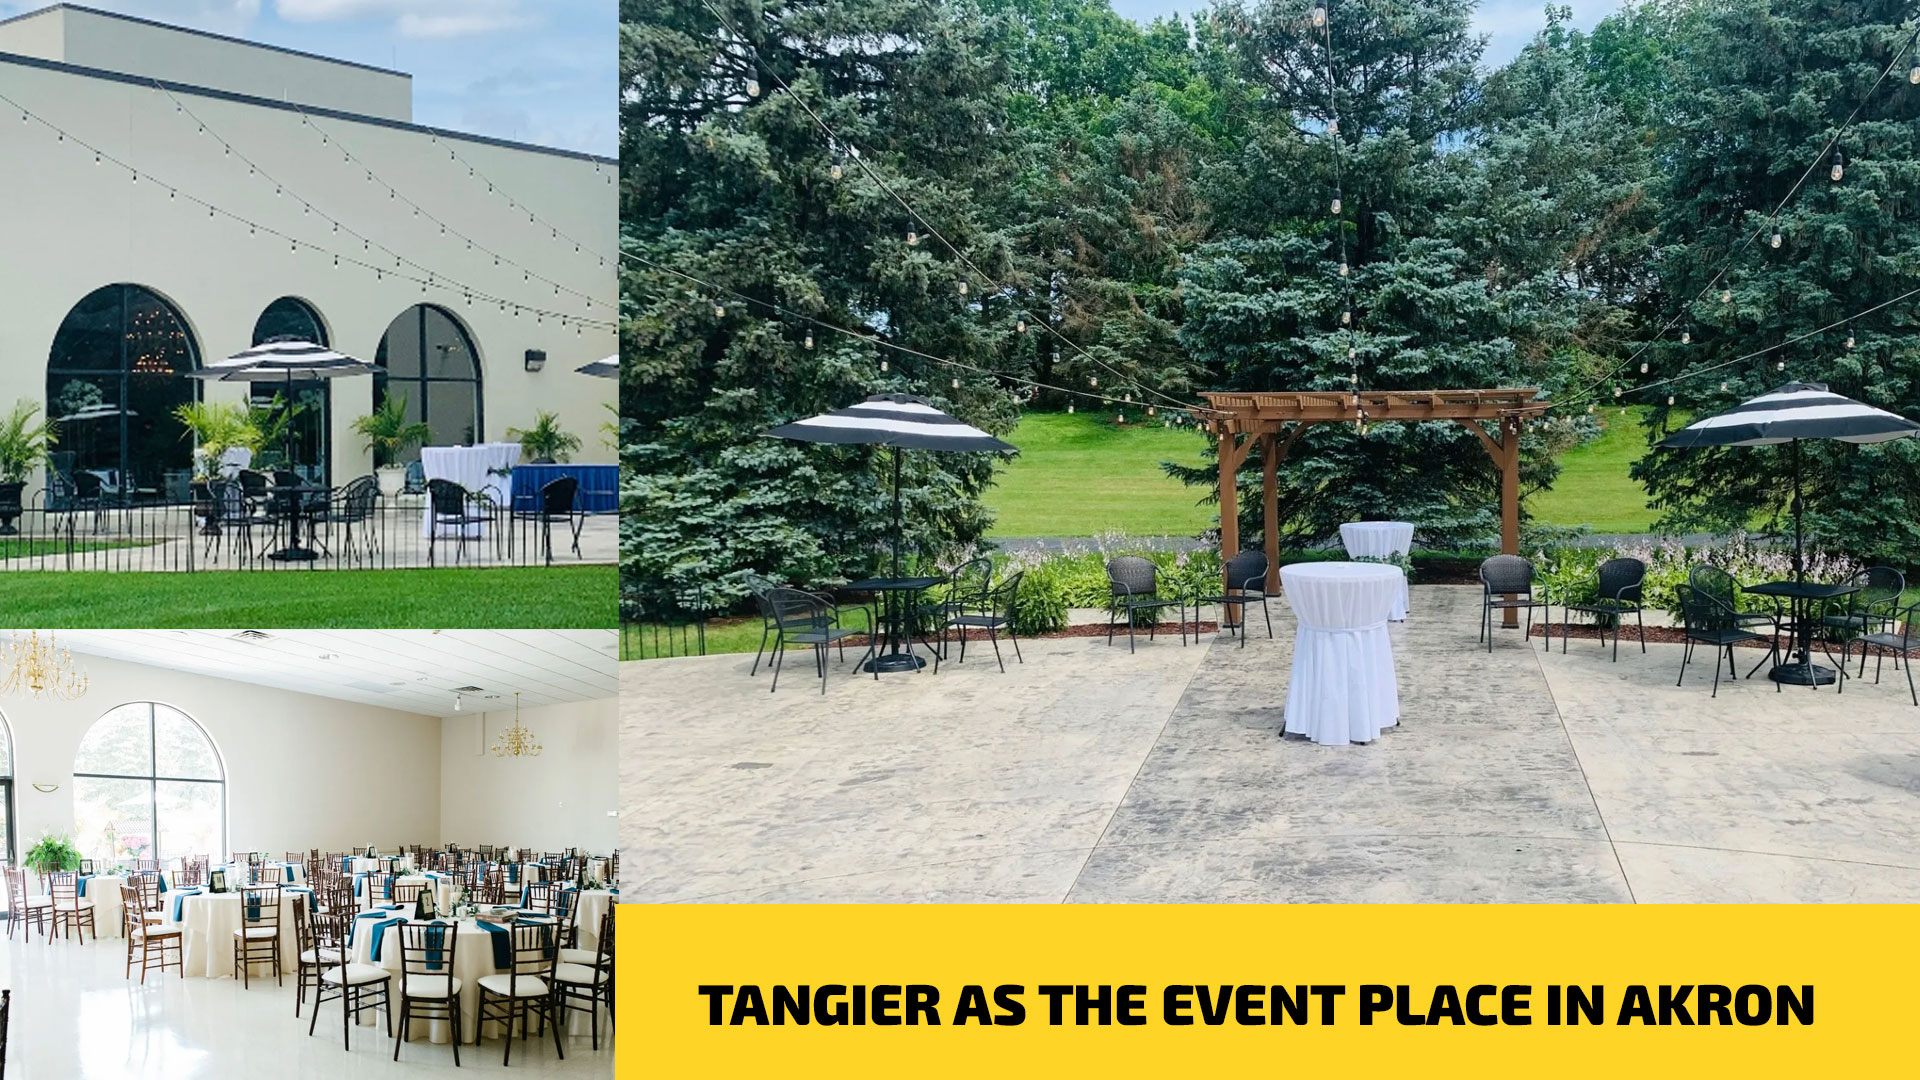 Tangier as the event place in Akron